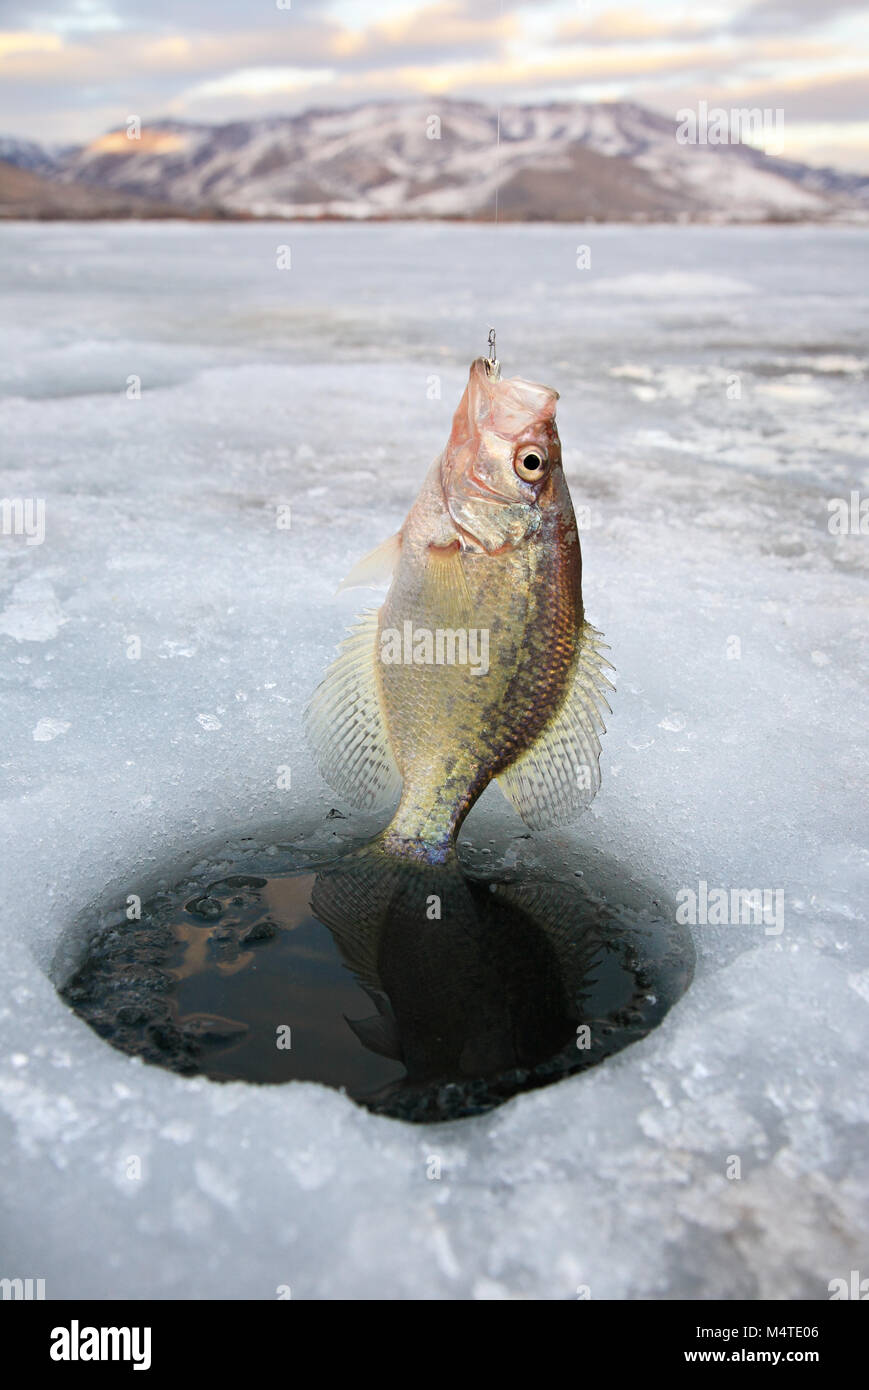 crappie pan fish being pulled out of ice hole in Northern Utah Stock Photo